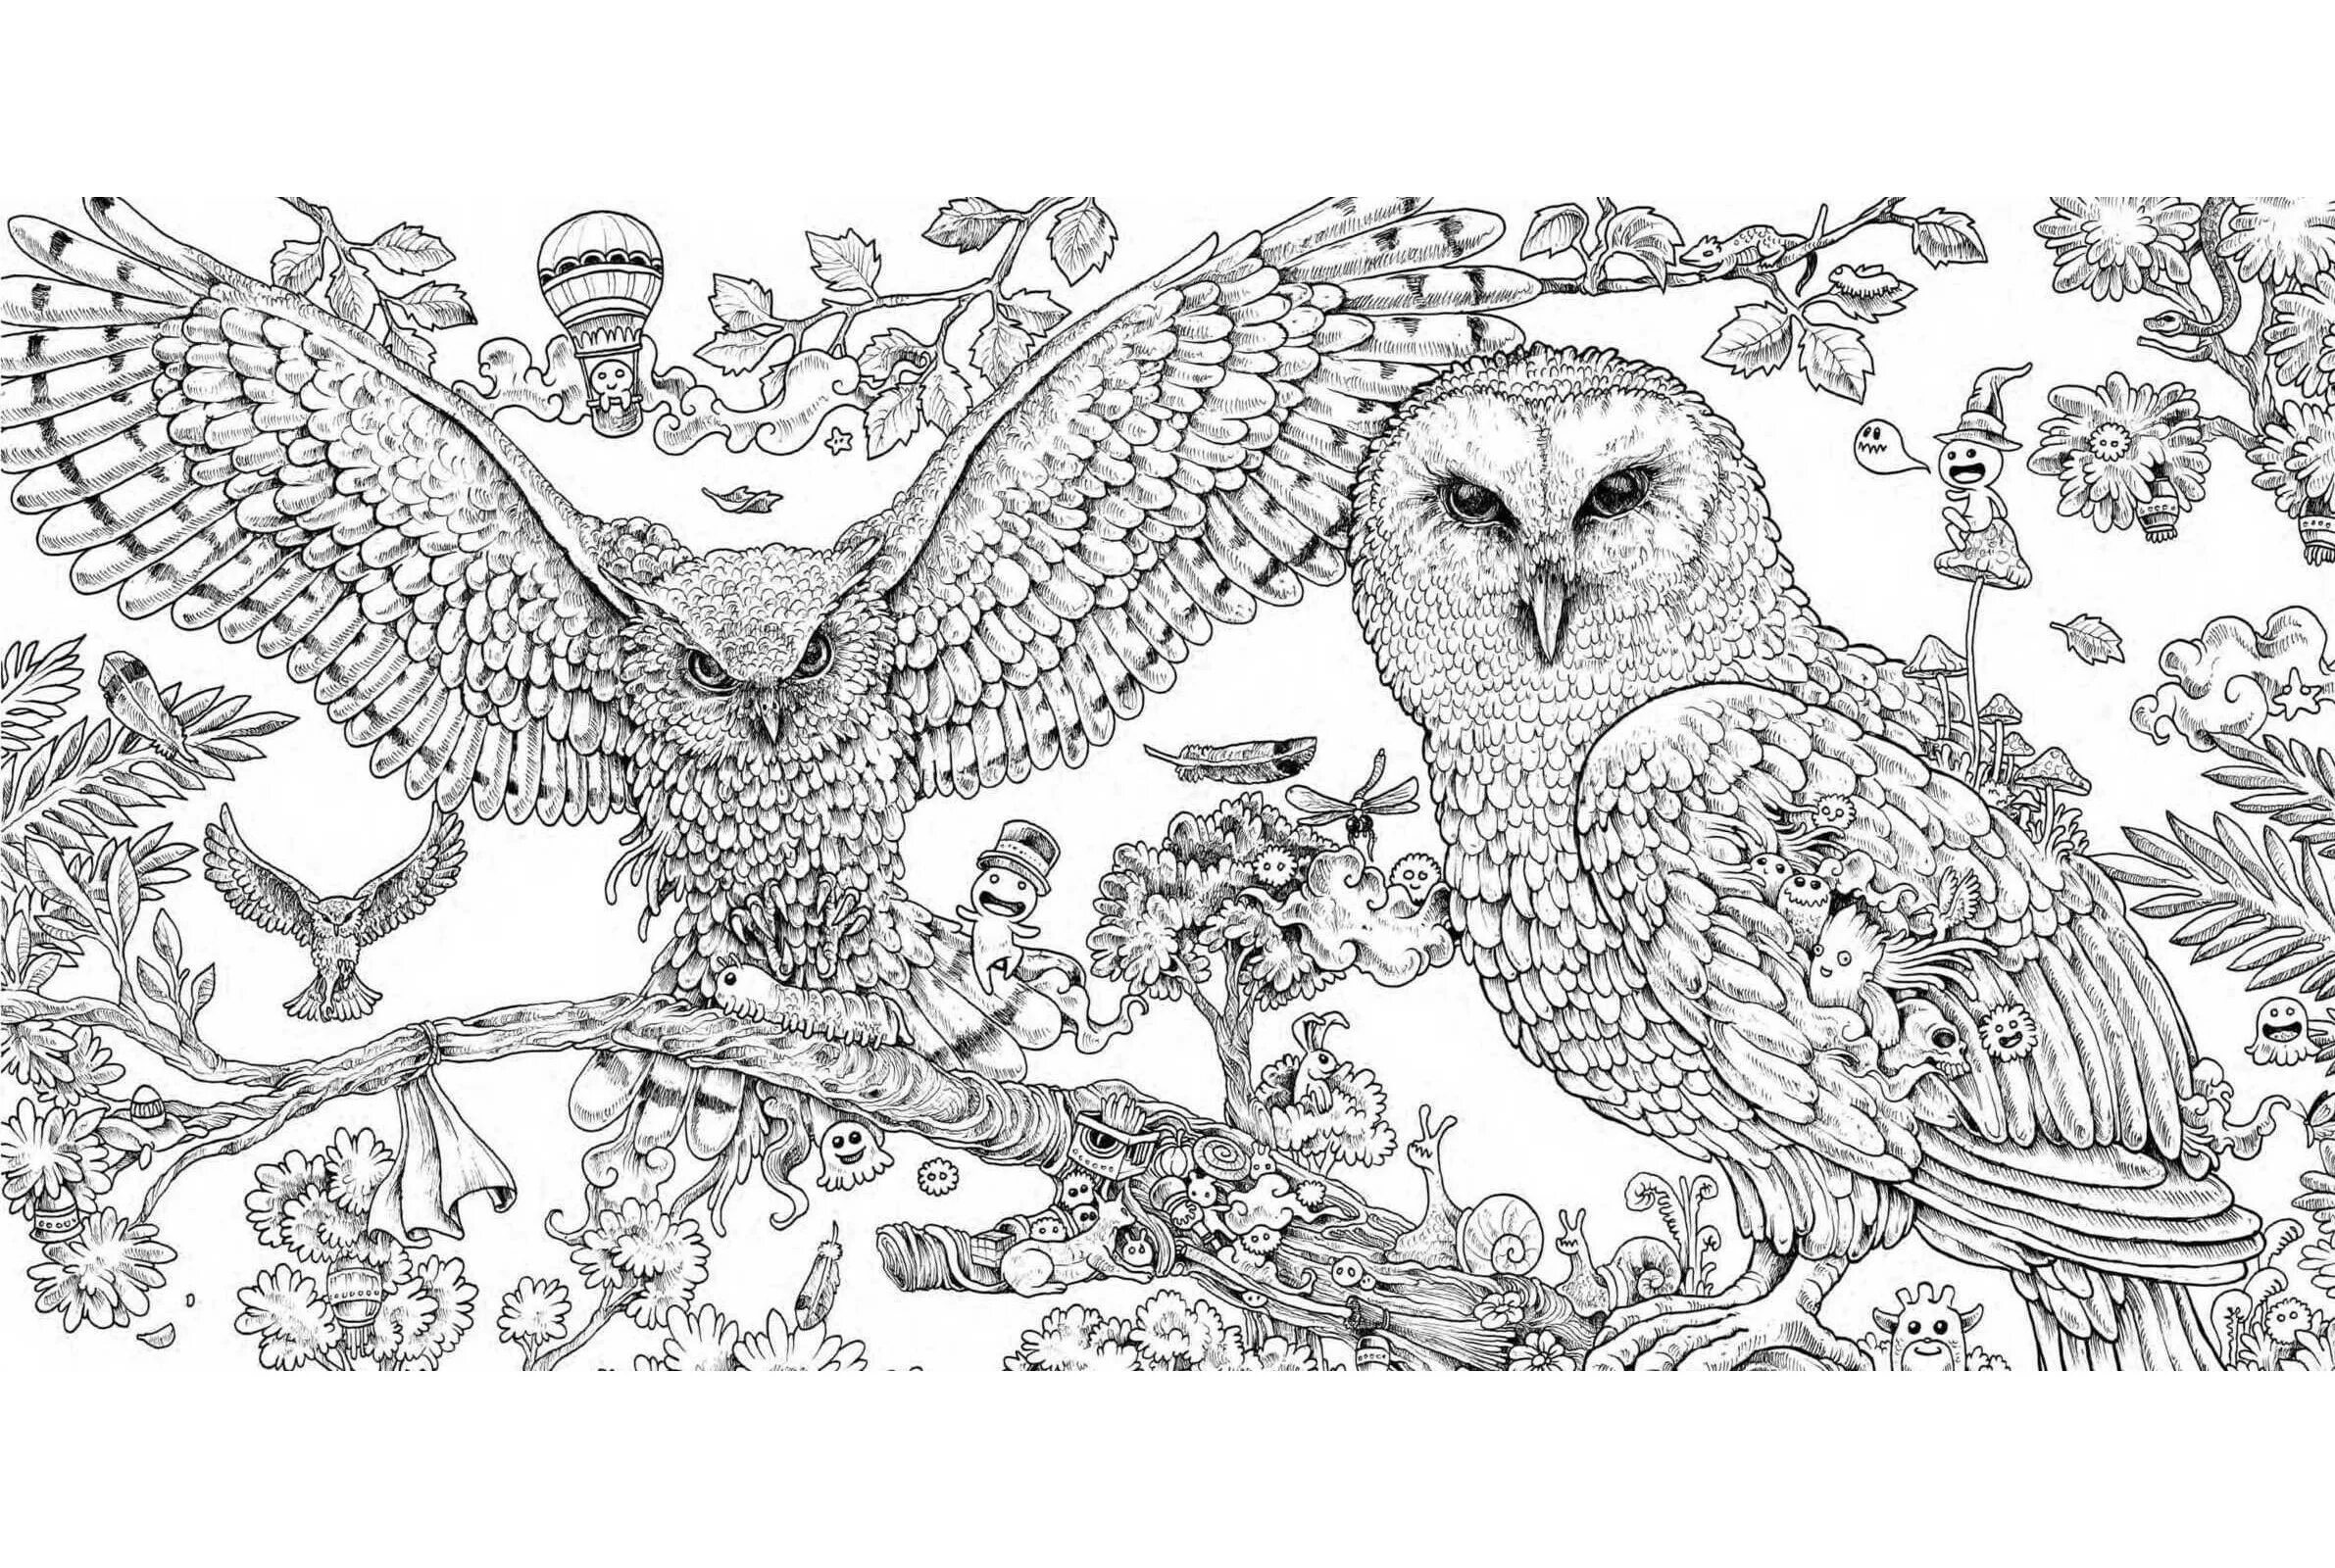 Delightful intricate coloring book for boys